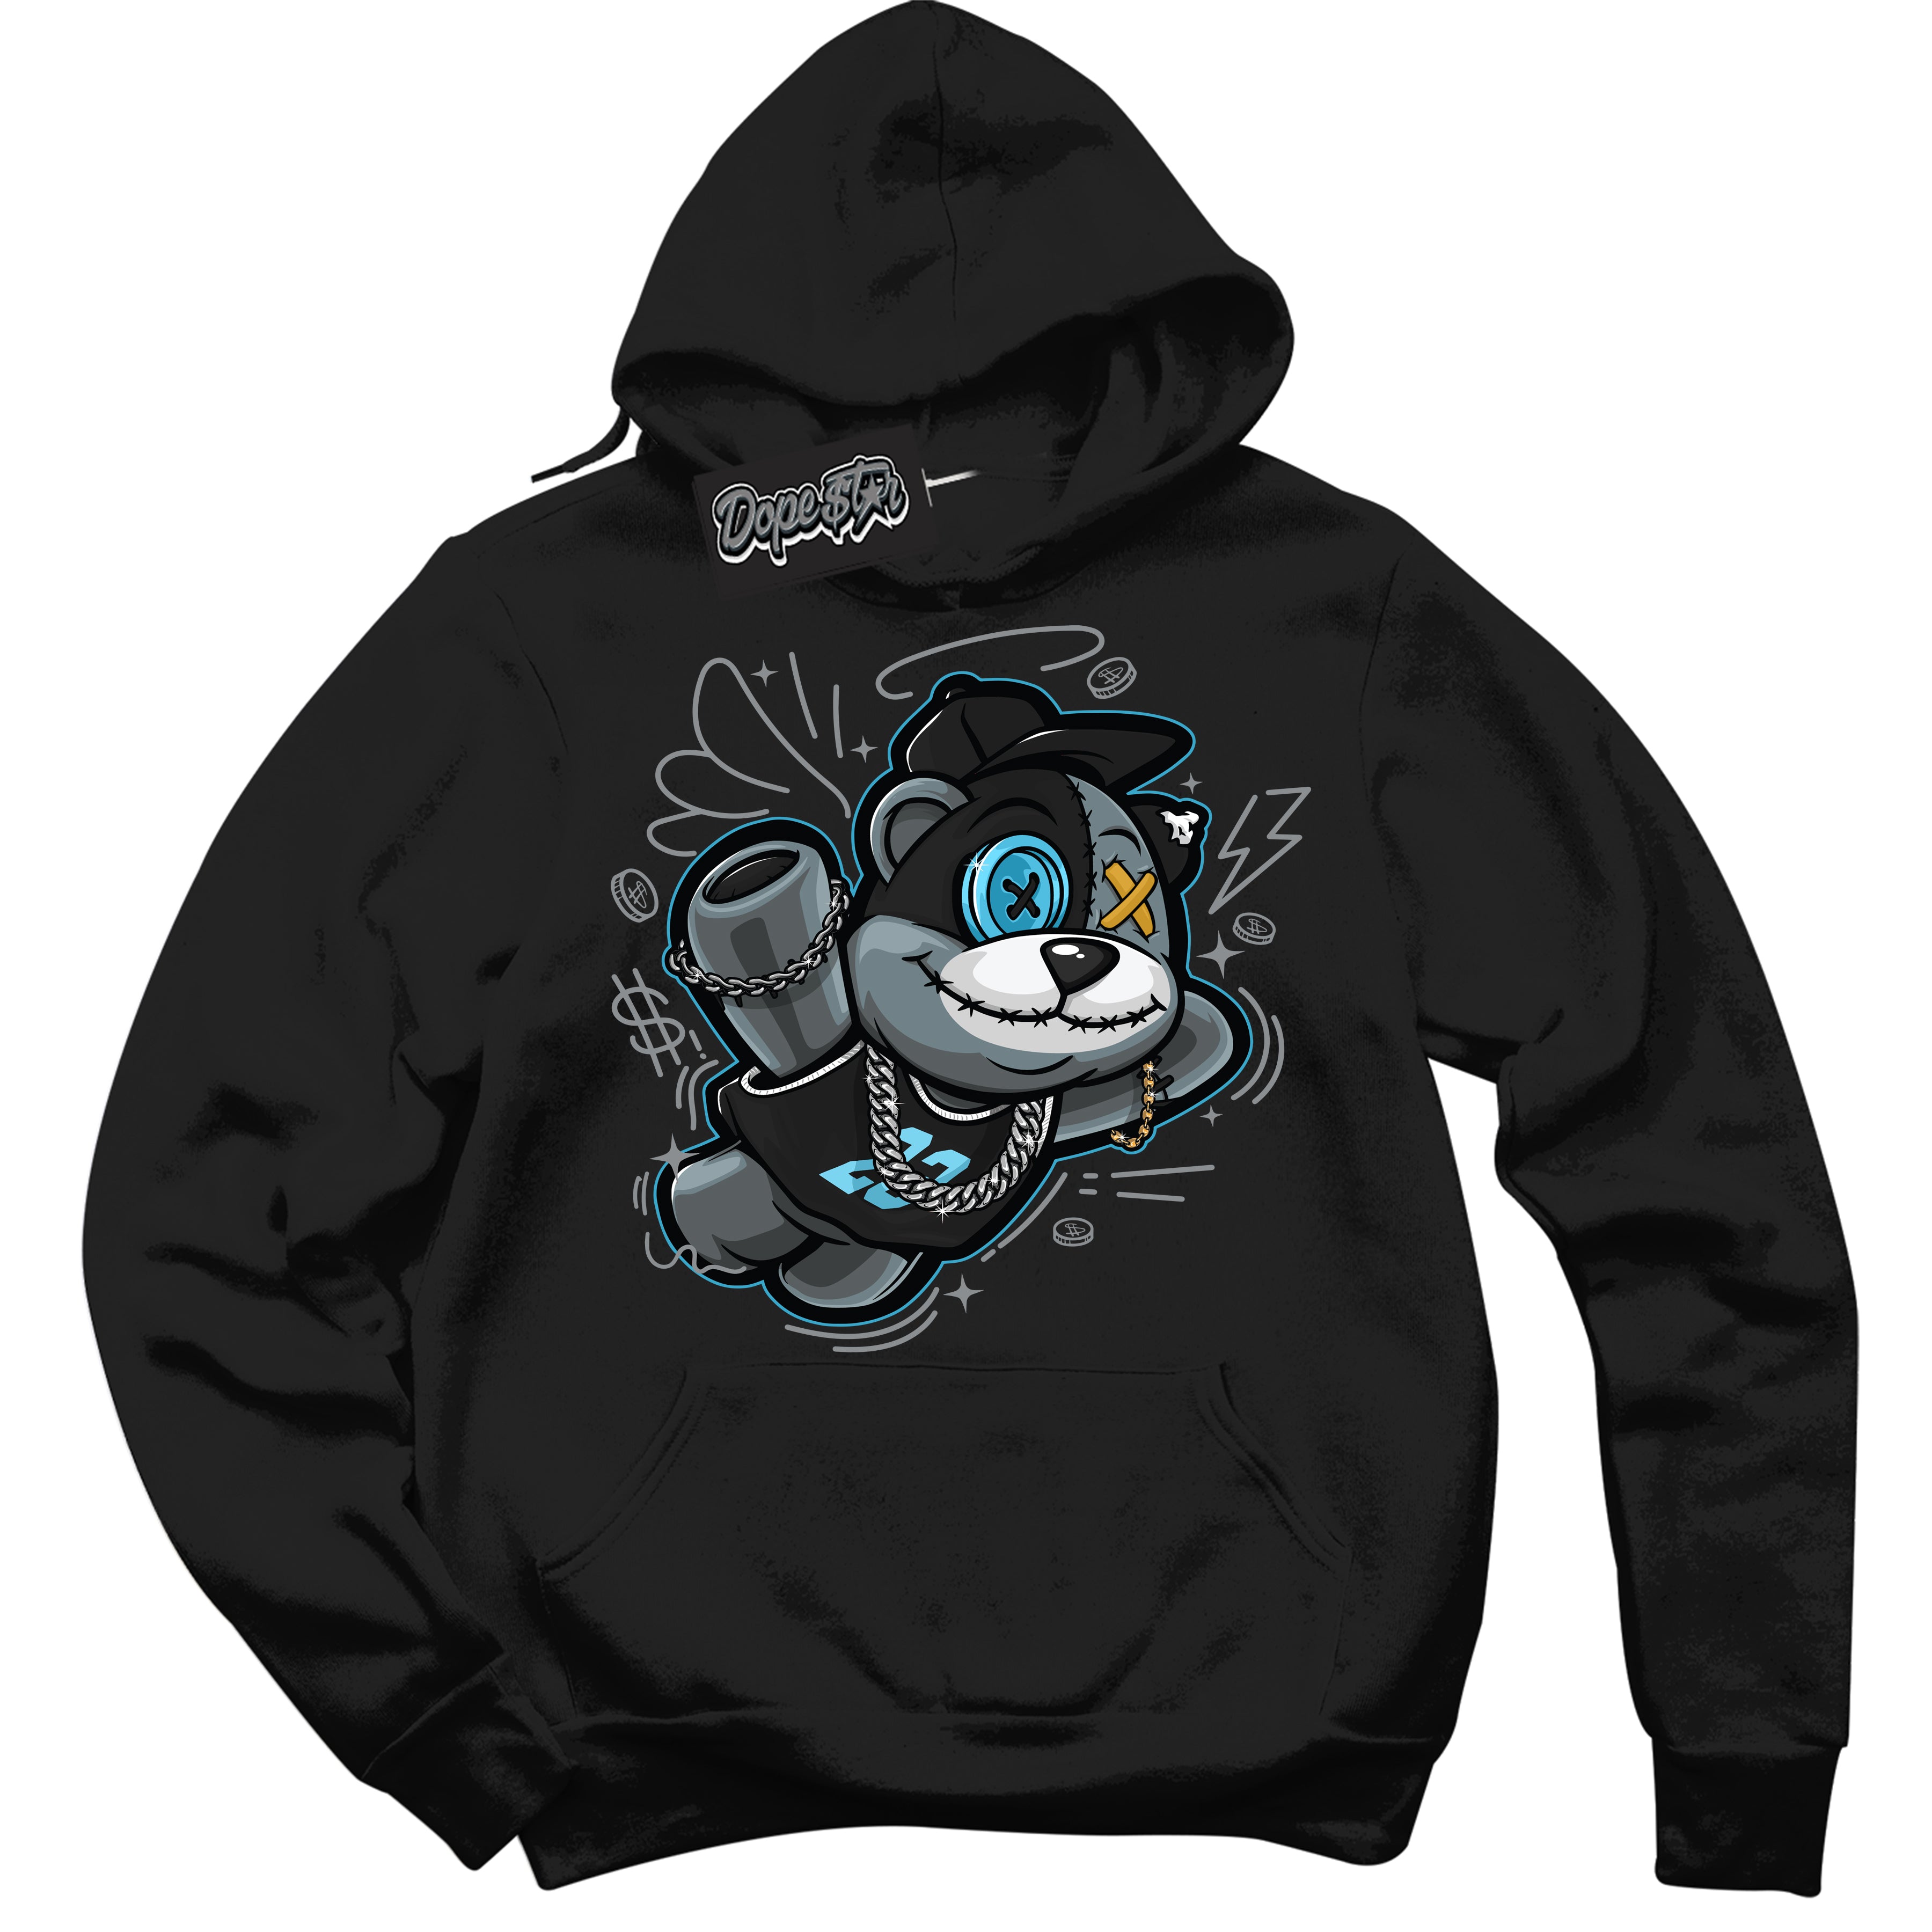 Cool Black Hoodie with “ Slam Dunk Bear ”  design that Perfectly Matches Aqua 5s Sneakers.